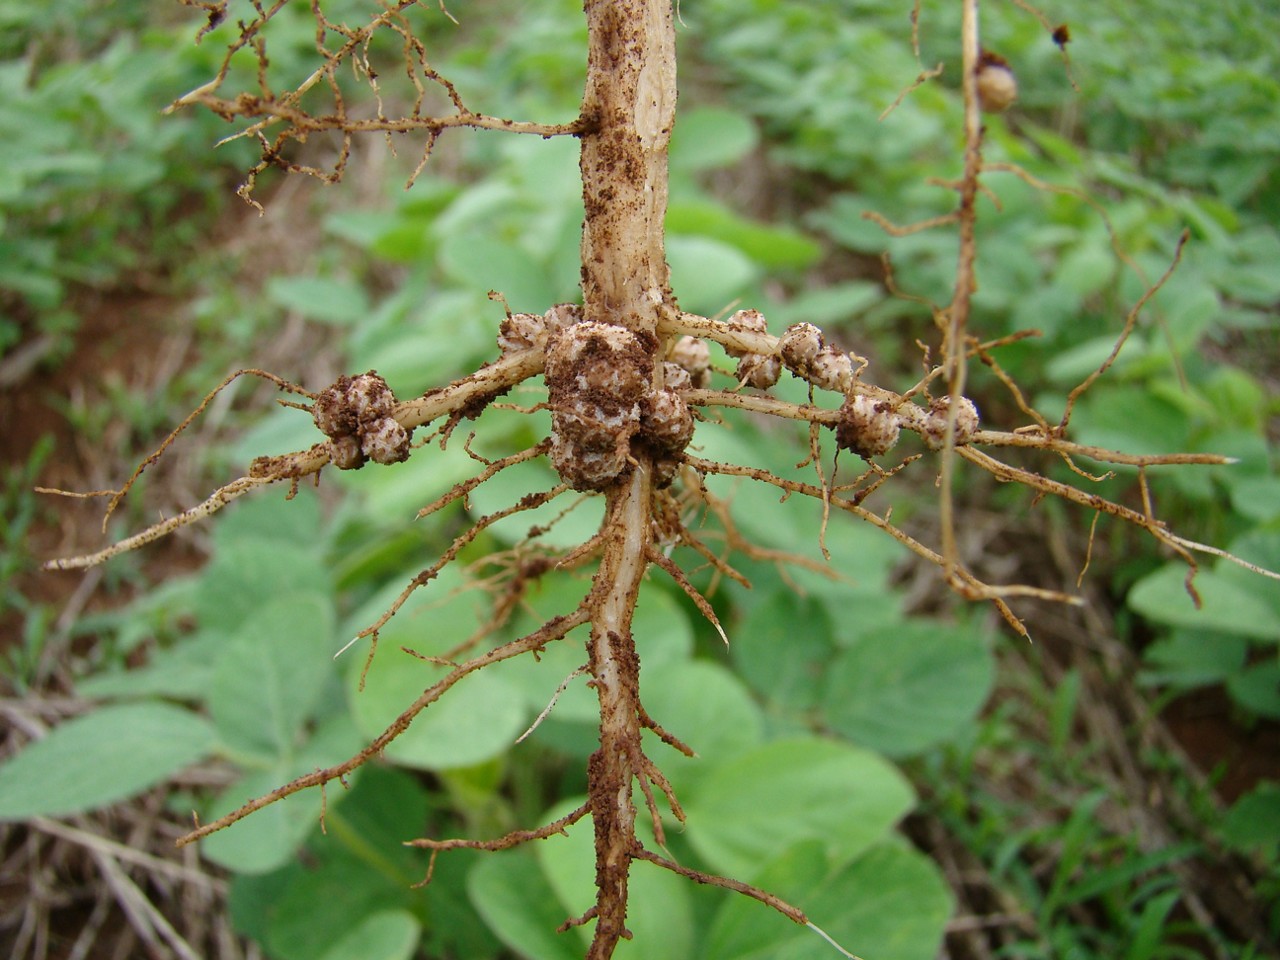 Root of soybean plant with nodules